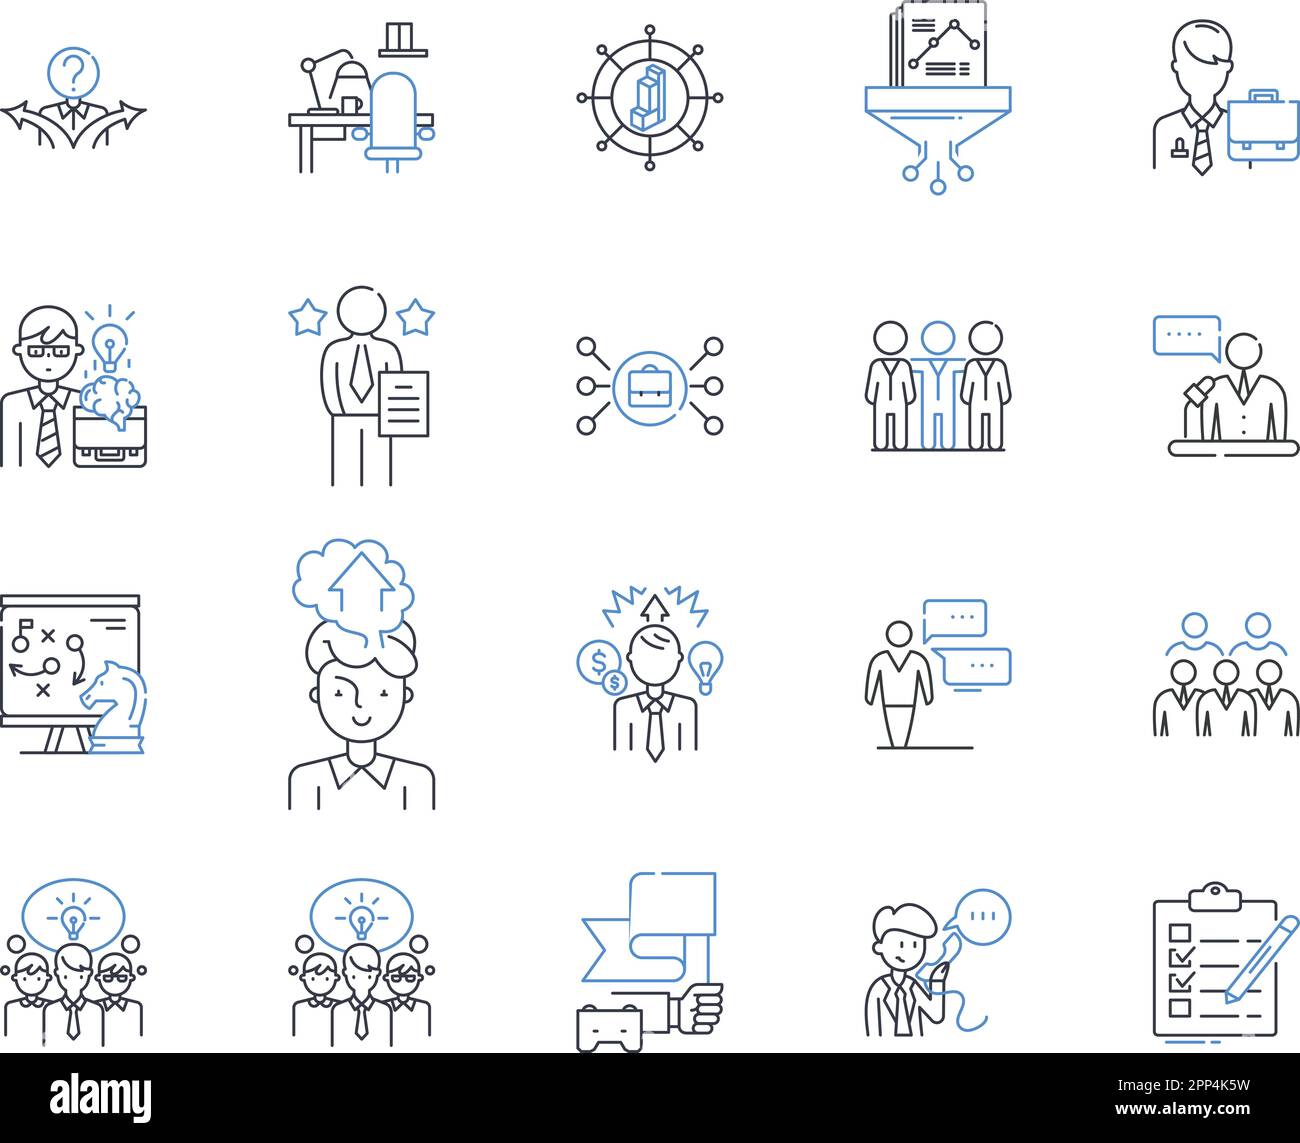 Keyboard warriors line icons collection. Trolls, Cyberbullying, Haters, Social media, Online harassment, Keyboard warriors, Cyber aggression vector Stock Vector